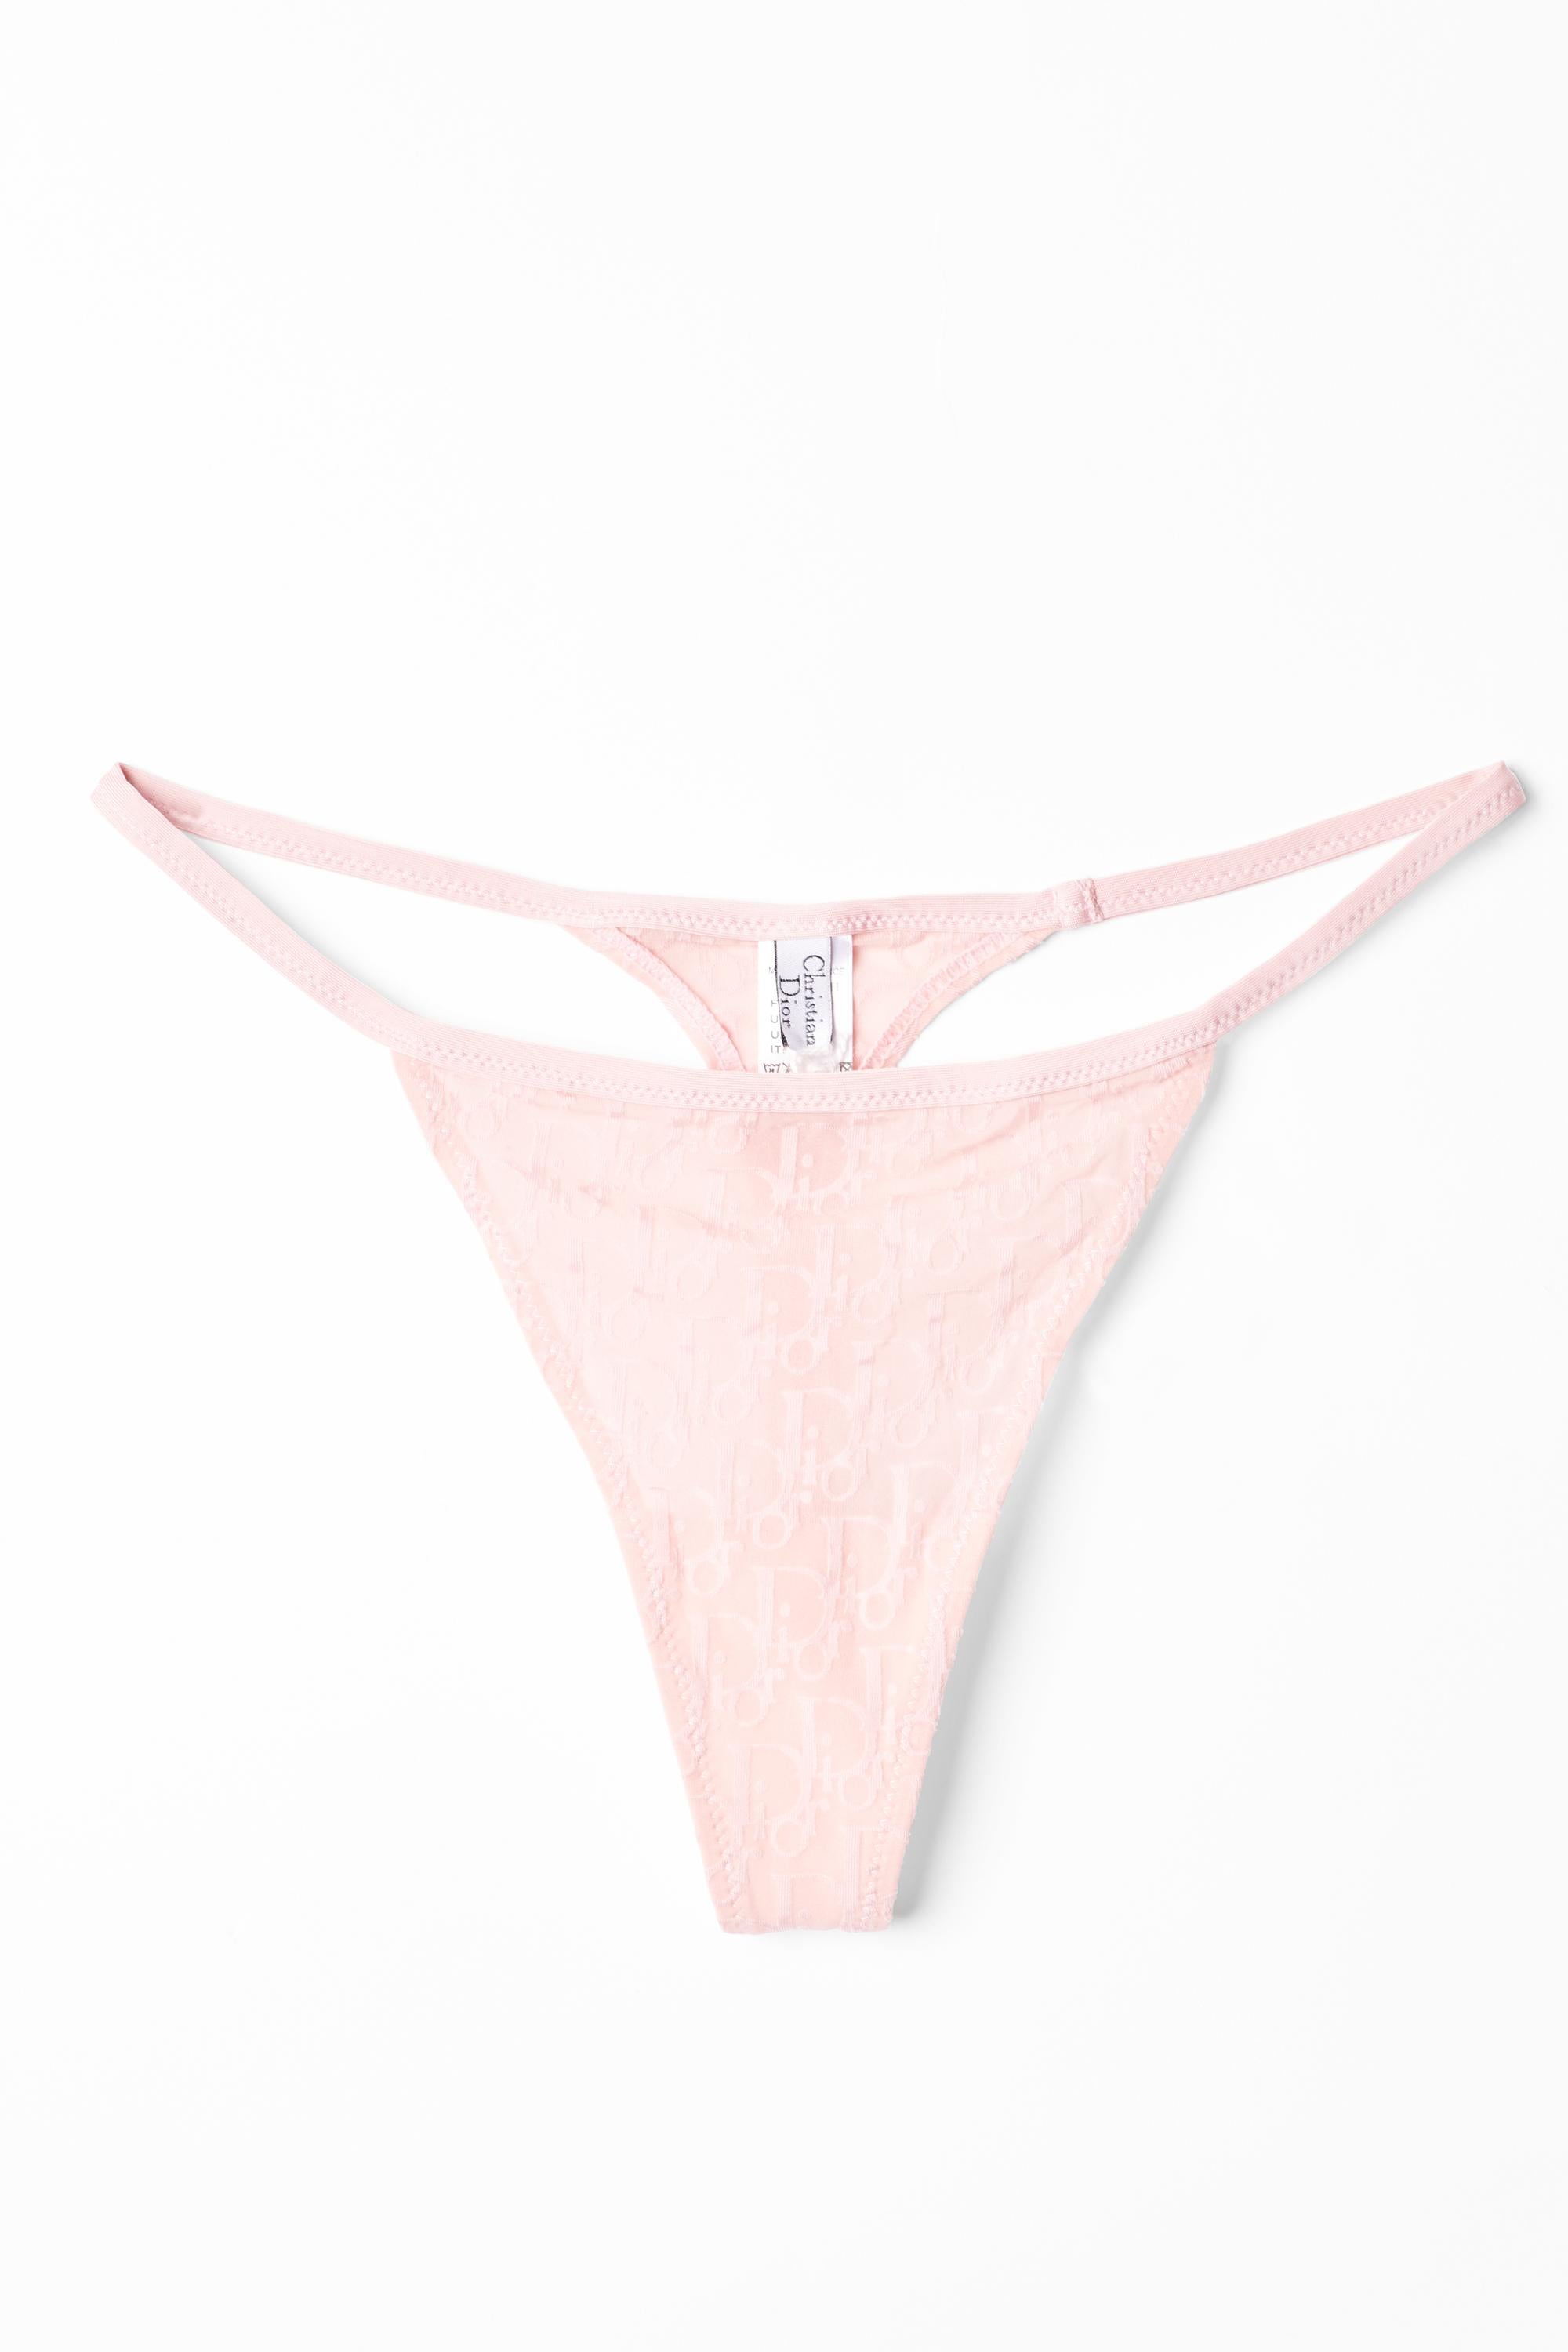 Christian Dior S/S 2003 pink mesh thong panty adorned with the Dior Monogram logo all over, designed by John Galliano for Dior . 
Authenticity Guaranteed.  In excellent condition, brand new with tags.

Tag Size: FR40
Modern Size: UK:8 , US:4 ,